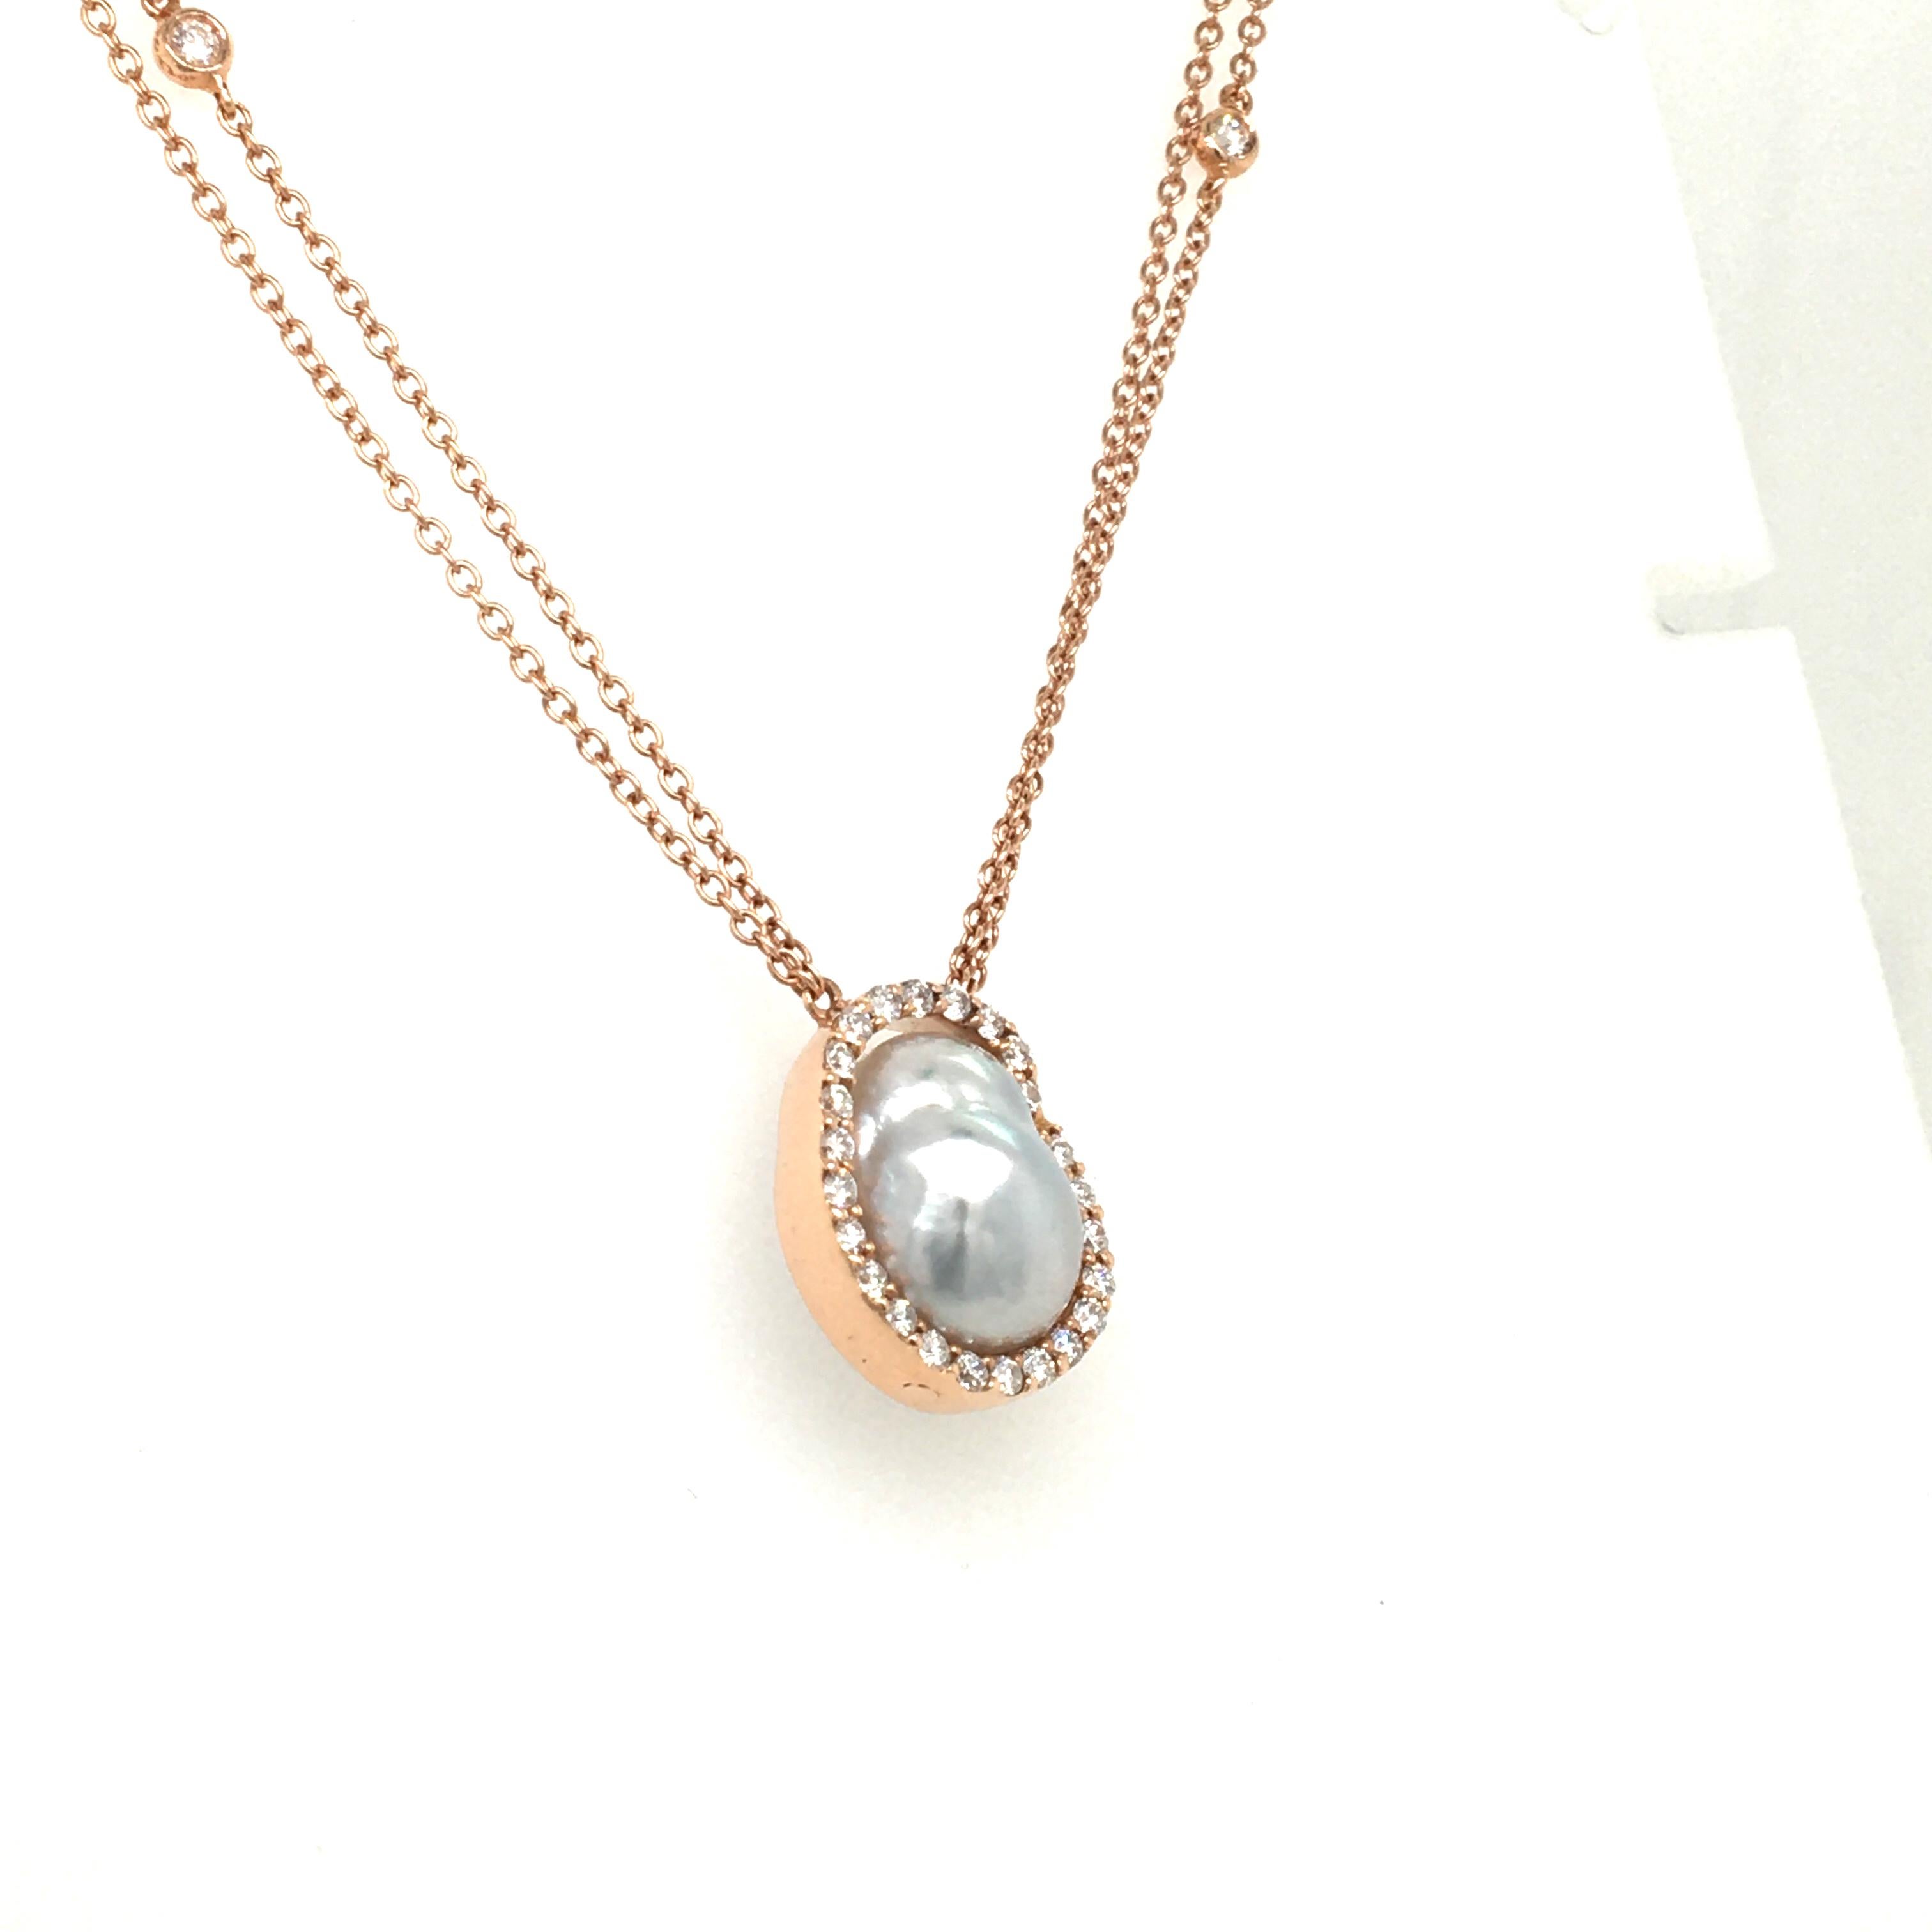 18 KT rose gold pendent set with diamonds 0.48 carats and one baroque pearl, round cut diamonds color G clarity VS
diamonds on the chain as well
made in Italy comes in a Box
